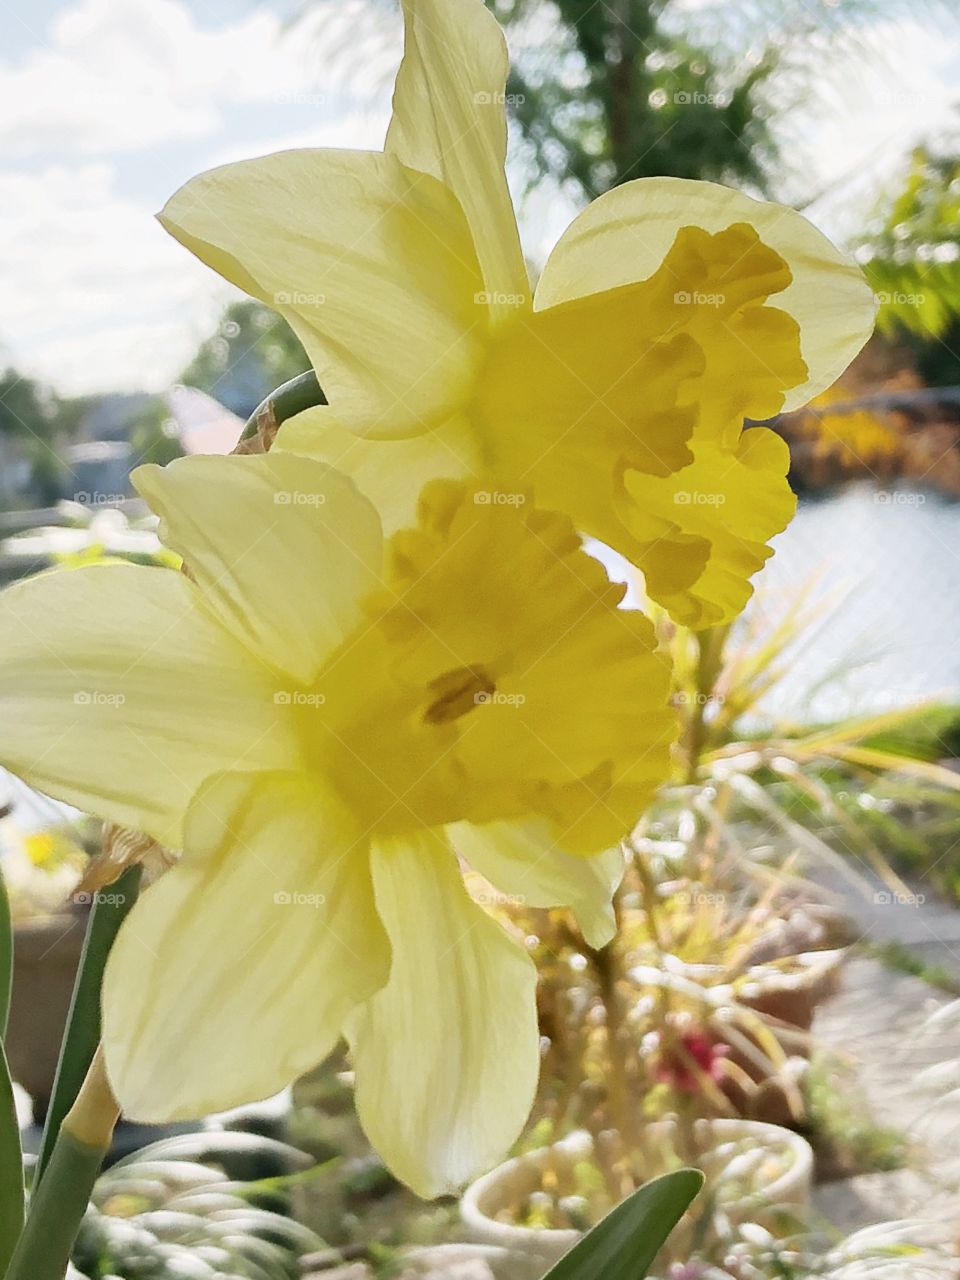 Holden daffodil blooms